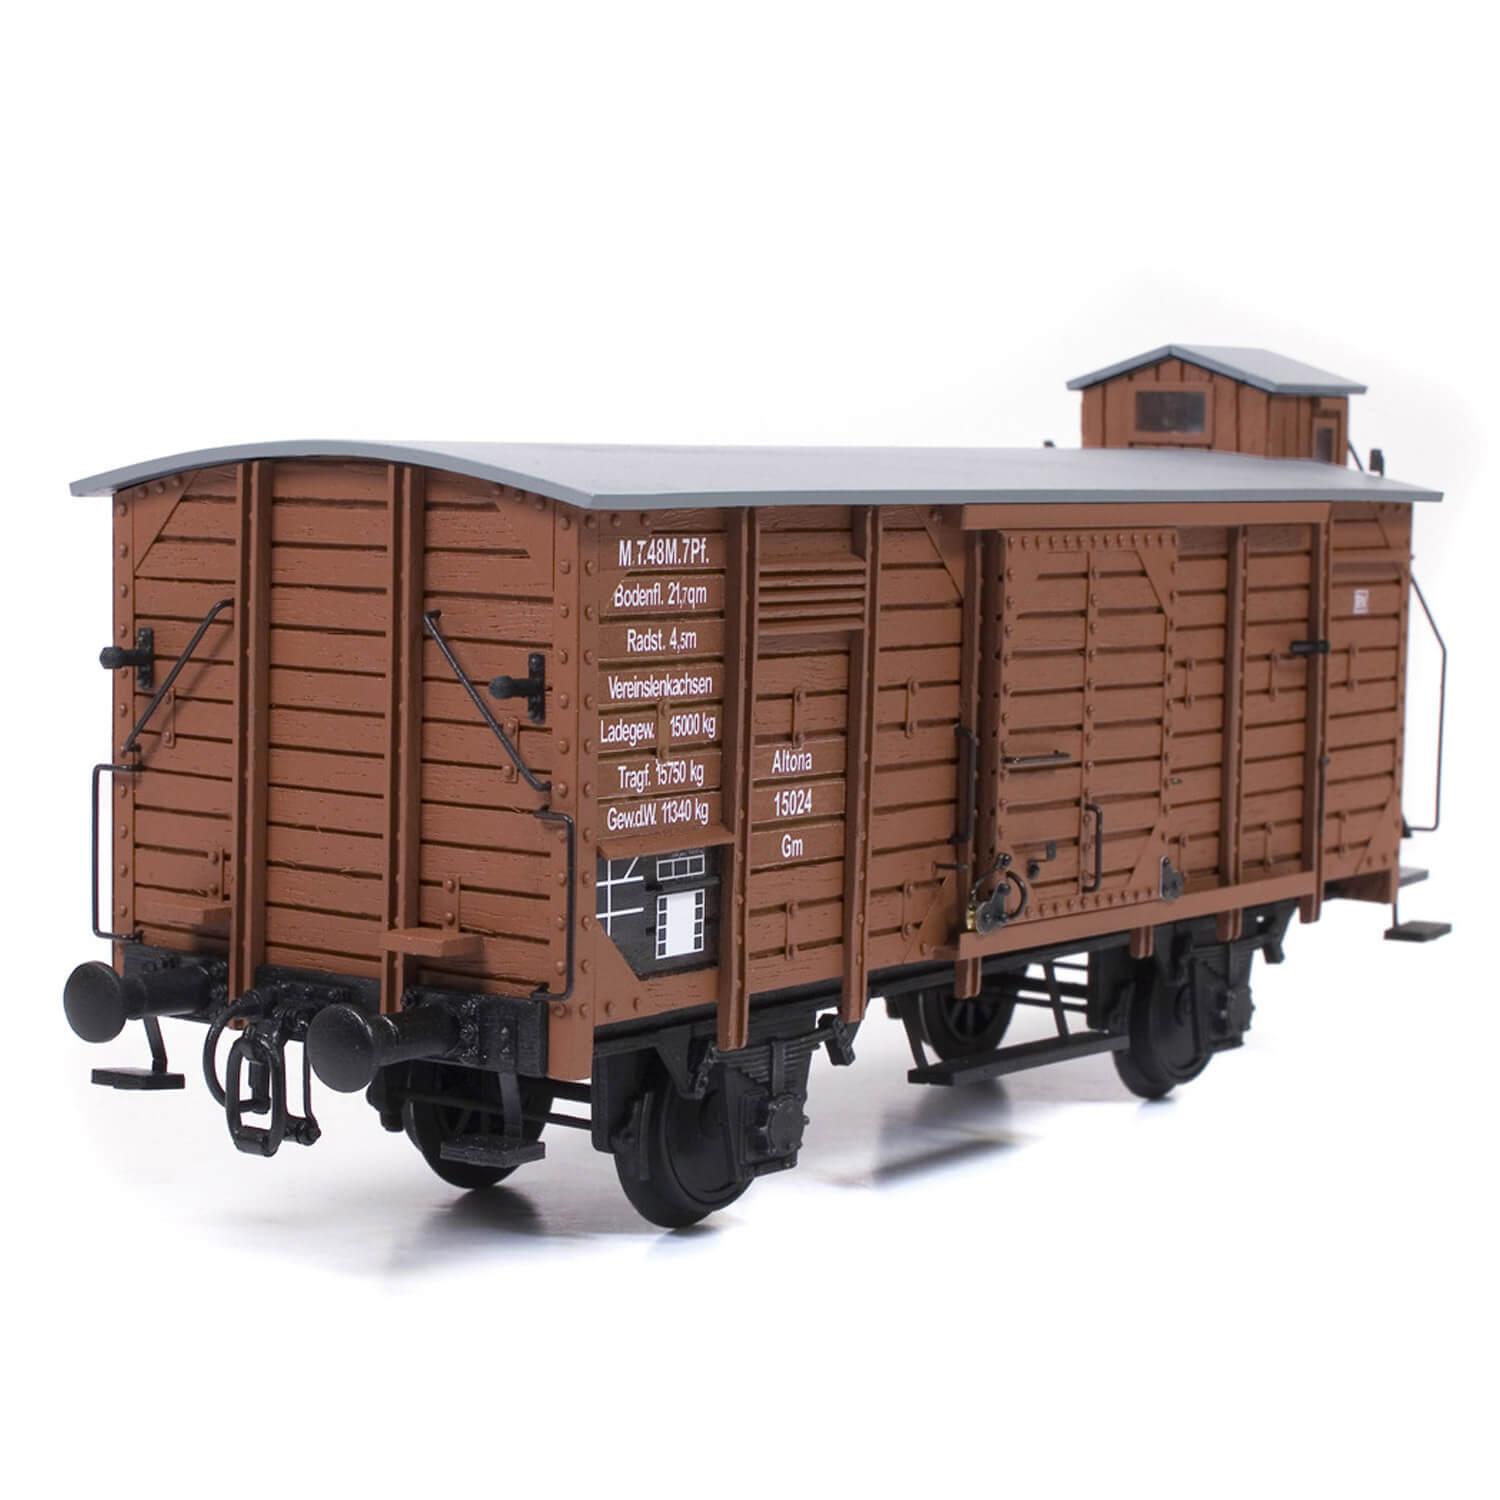 Occre Freight Rail Wagon 1:32 Scale G-45 Gauge Metal & Wood Model Kit 